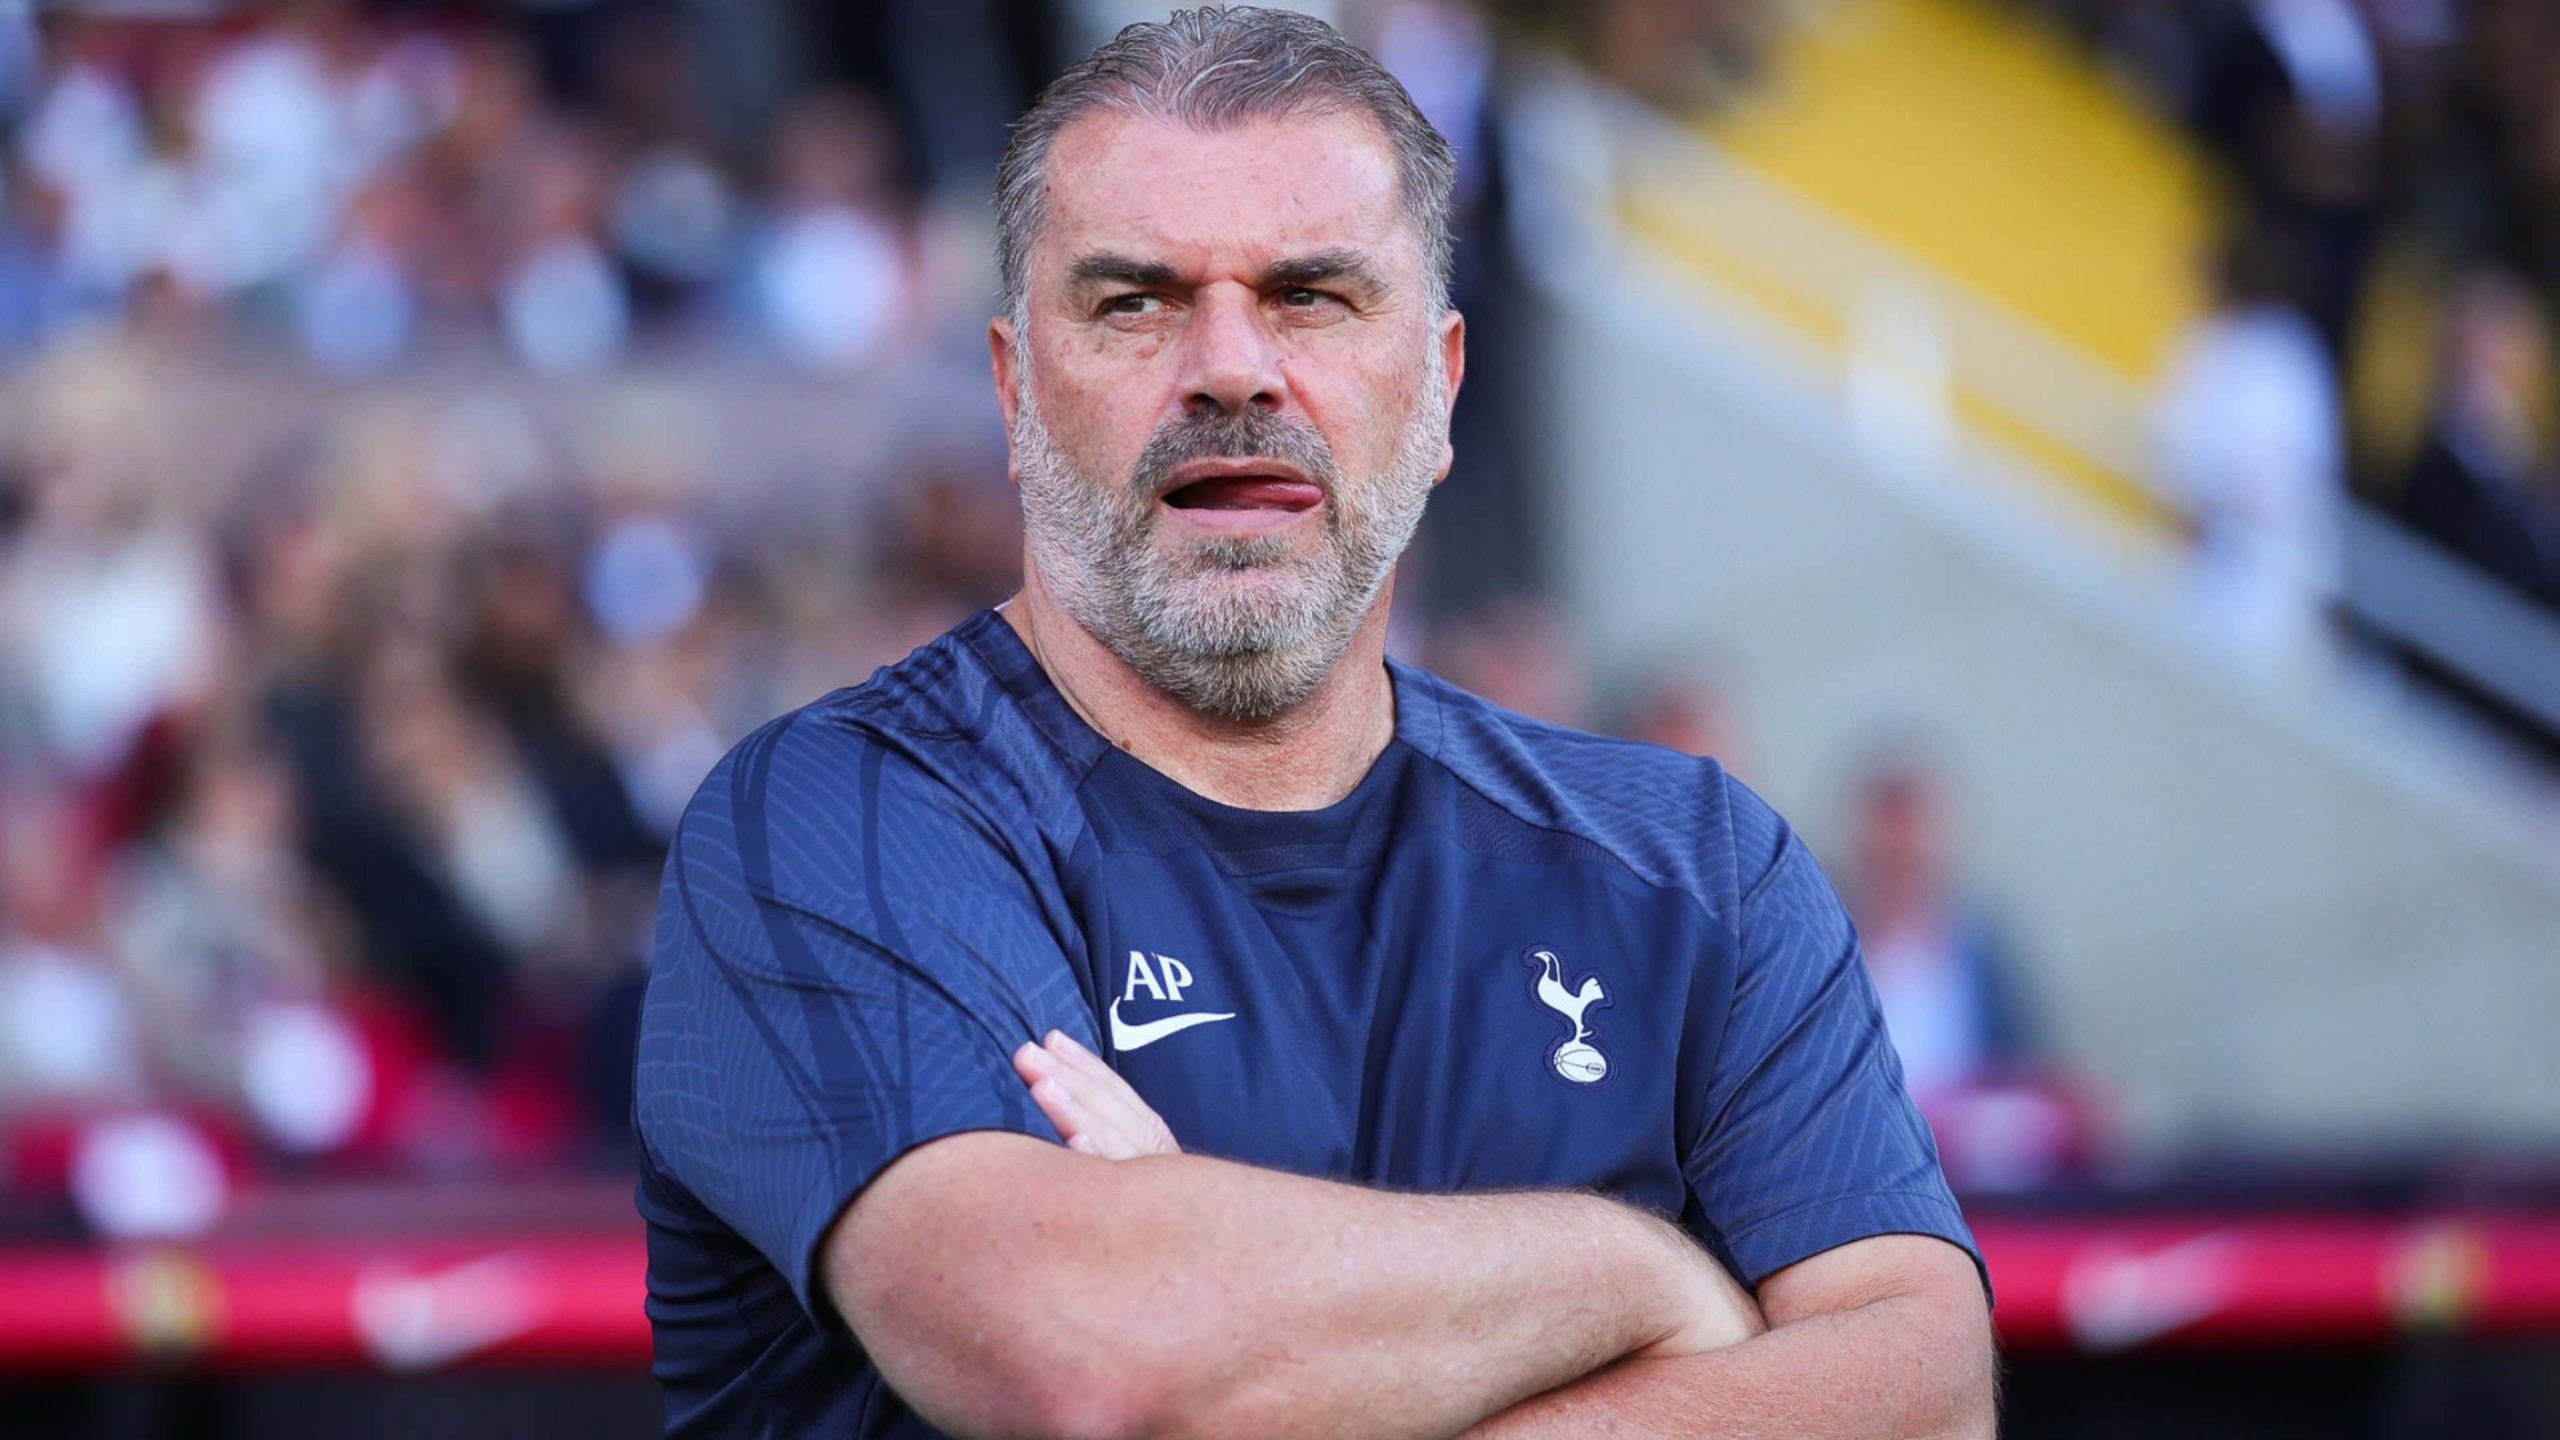 Postecoglou Has Mentioned that Tottenham Players Do Not Find it Fun to Train Against 25-year-old